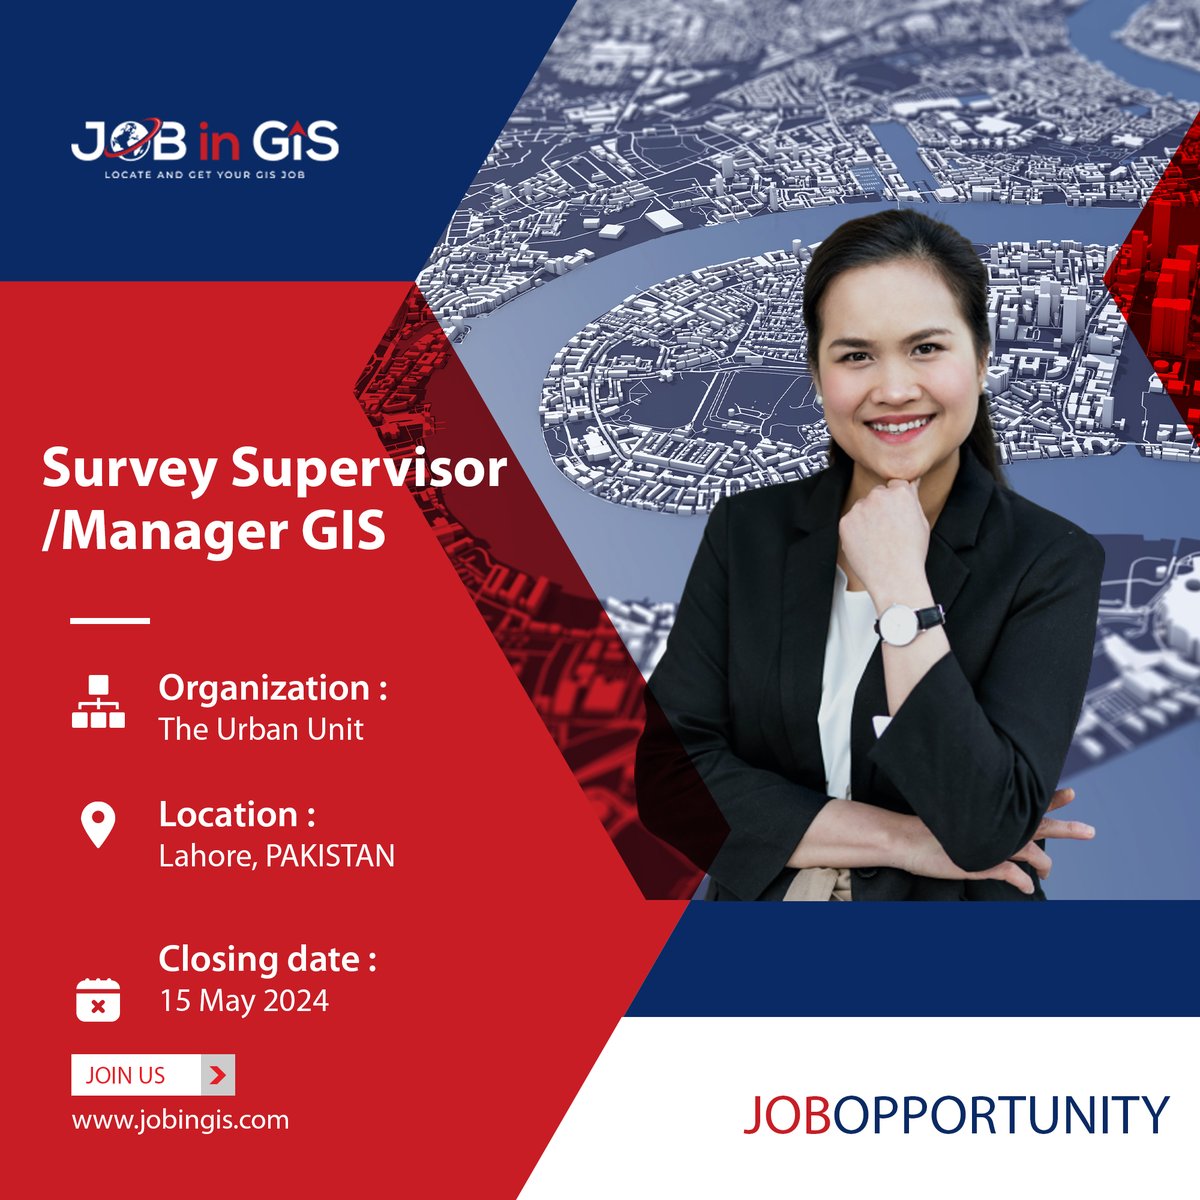 #jobingis : The Urban Unit is recruiting a Survey Supervisor/Manager GIS
📍 : #Lahore #Pakistan 

Apply here 👉 : jobingis.com/jobs/survey-su…

#Jobs #mapping #GIS #geospatial #remotesensing #gisjobs #Geography #cartography